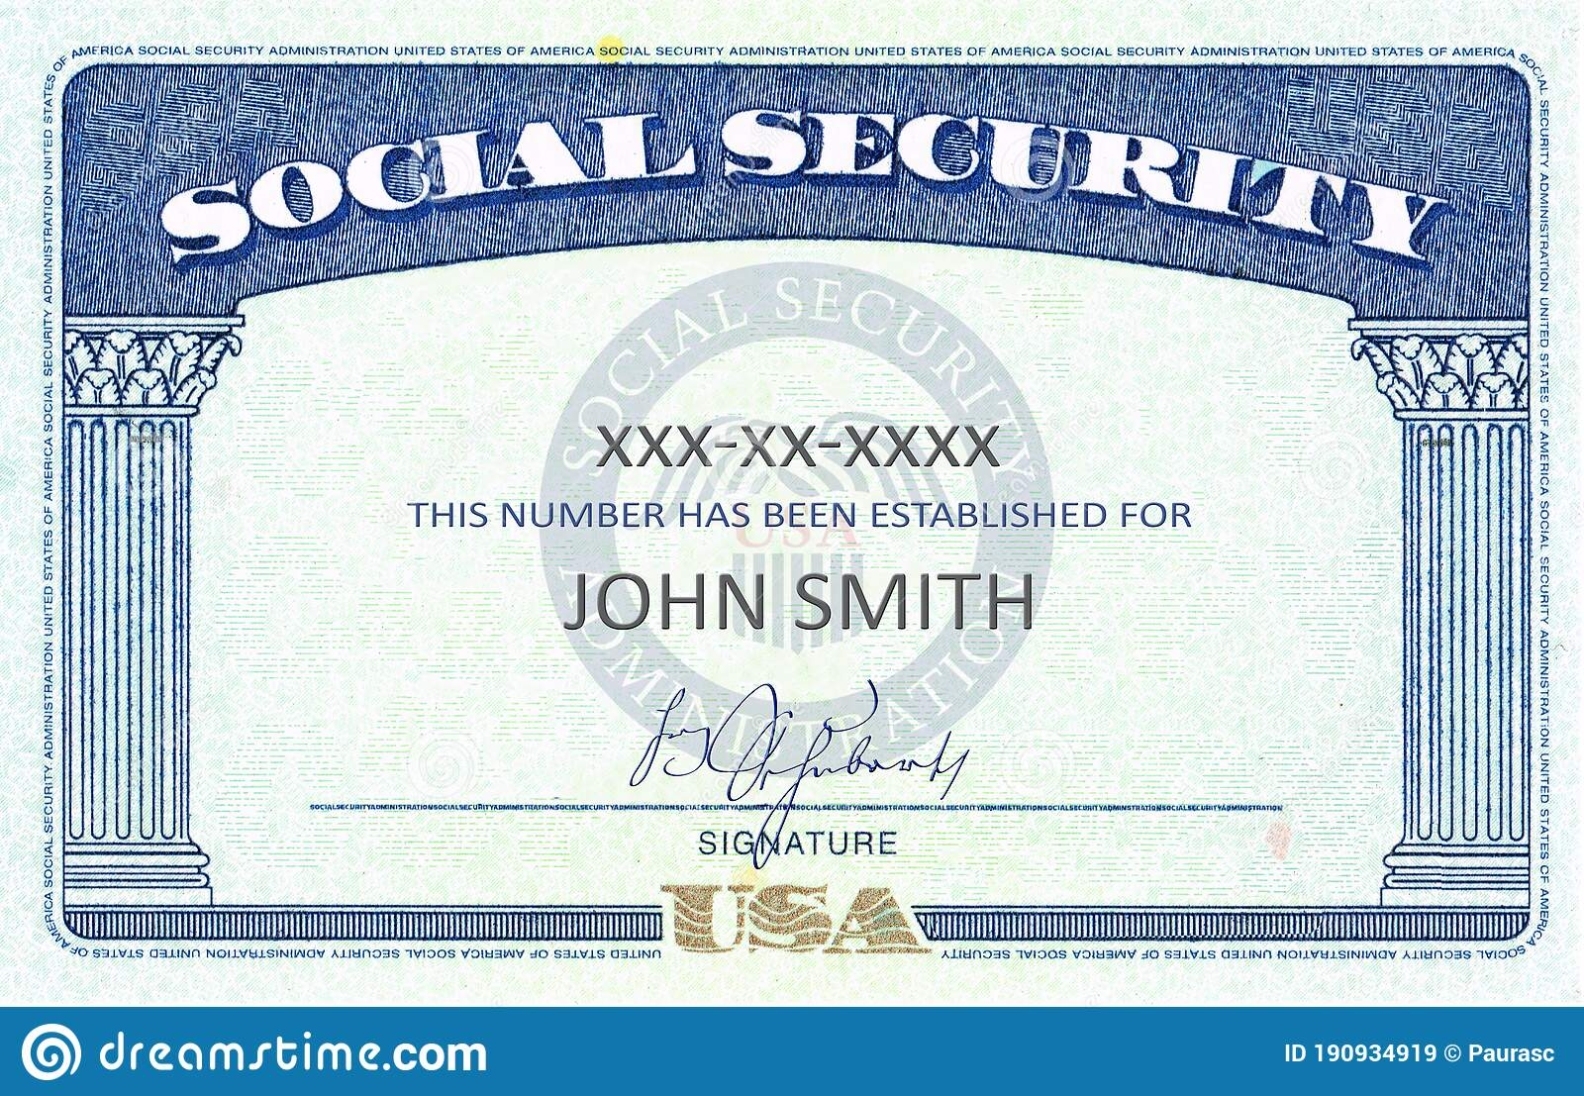 Free Social Security Card Template Photoshop - Printable Templates regarding Social Security Card Template Photoshop